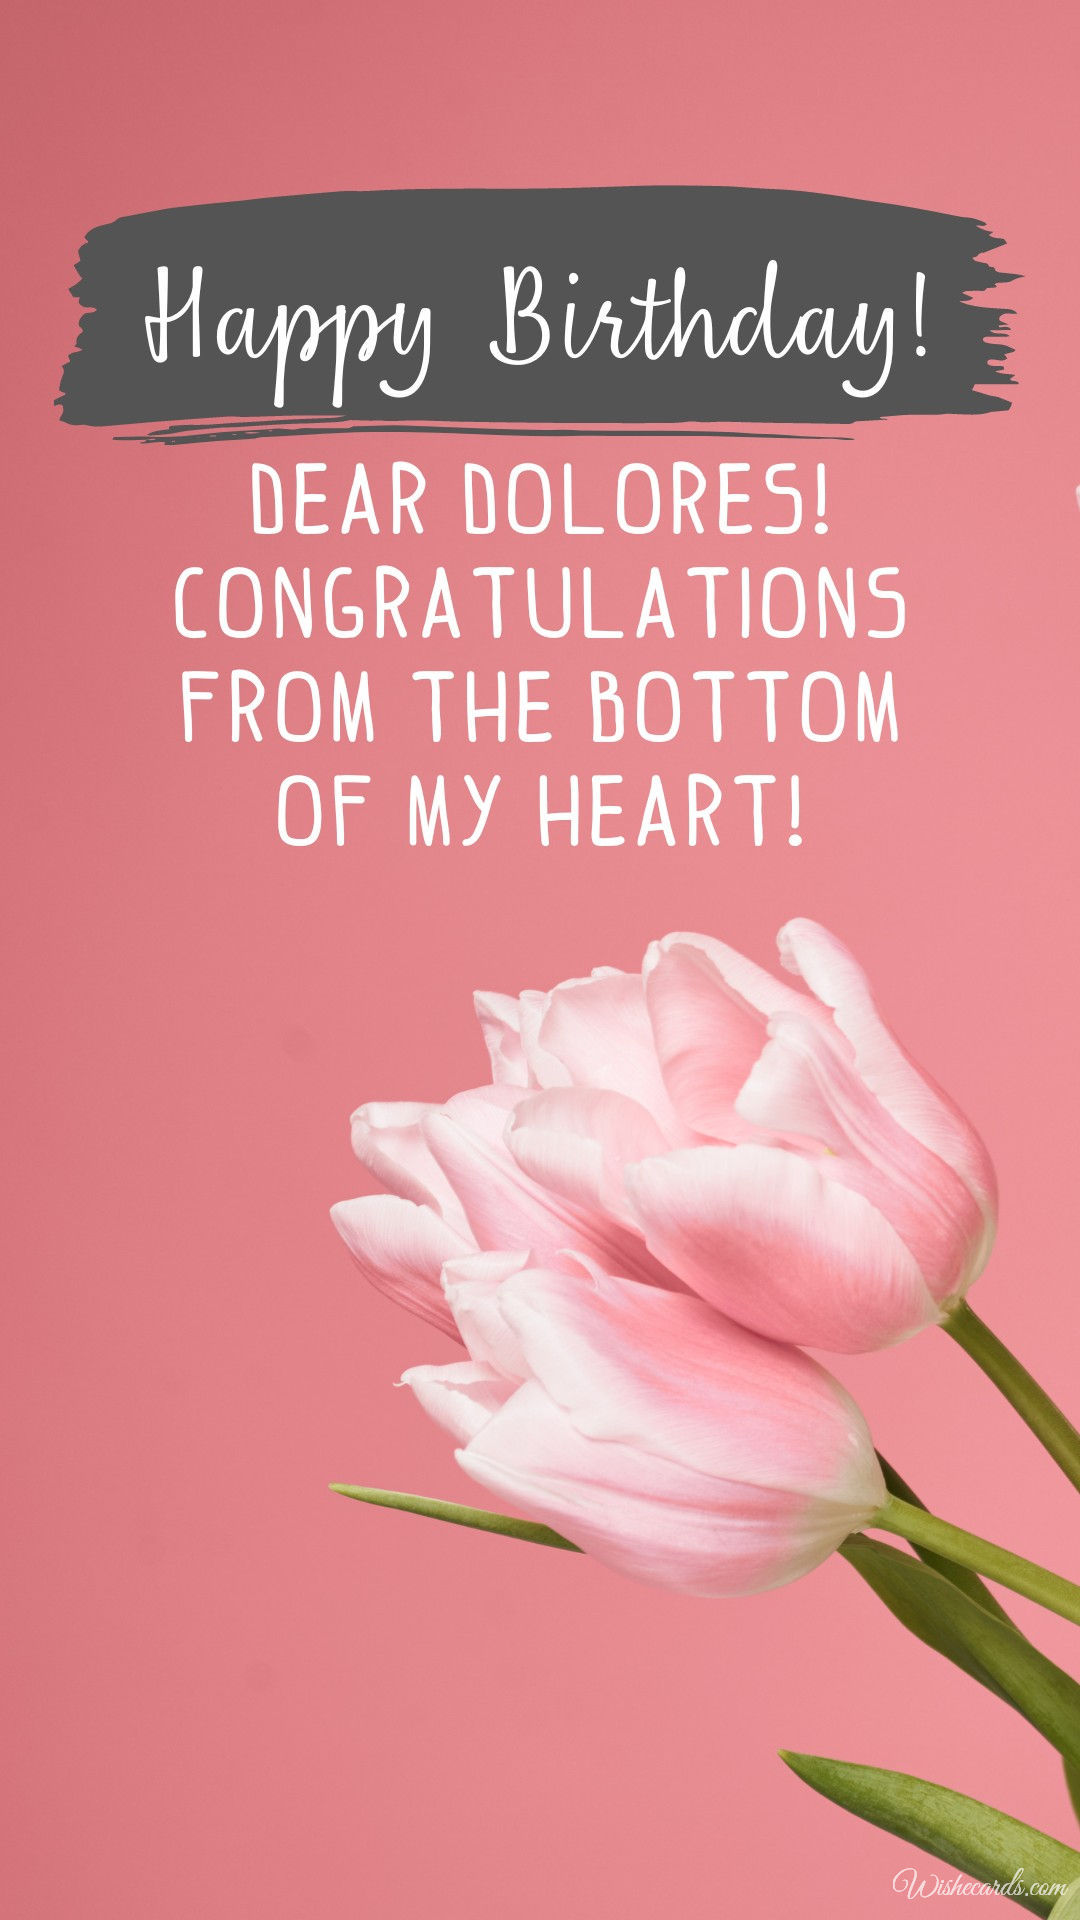 Birthday Card for Dolores